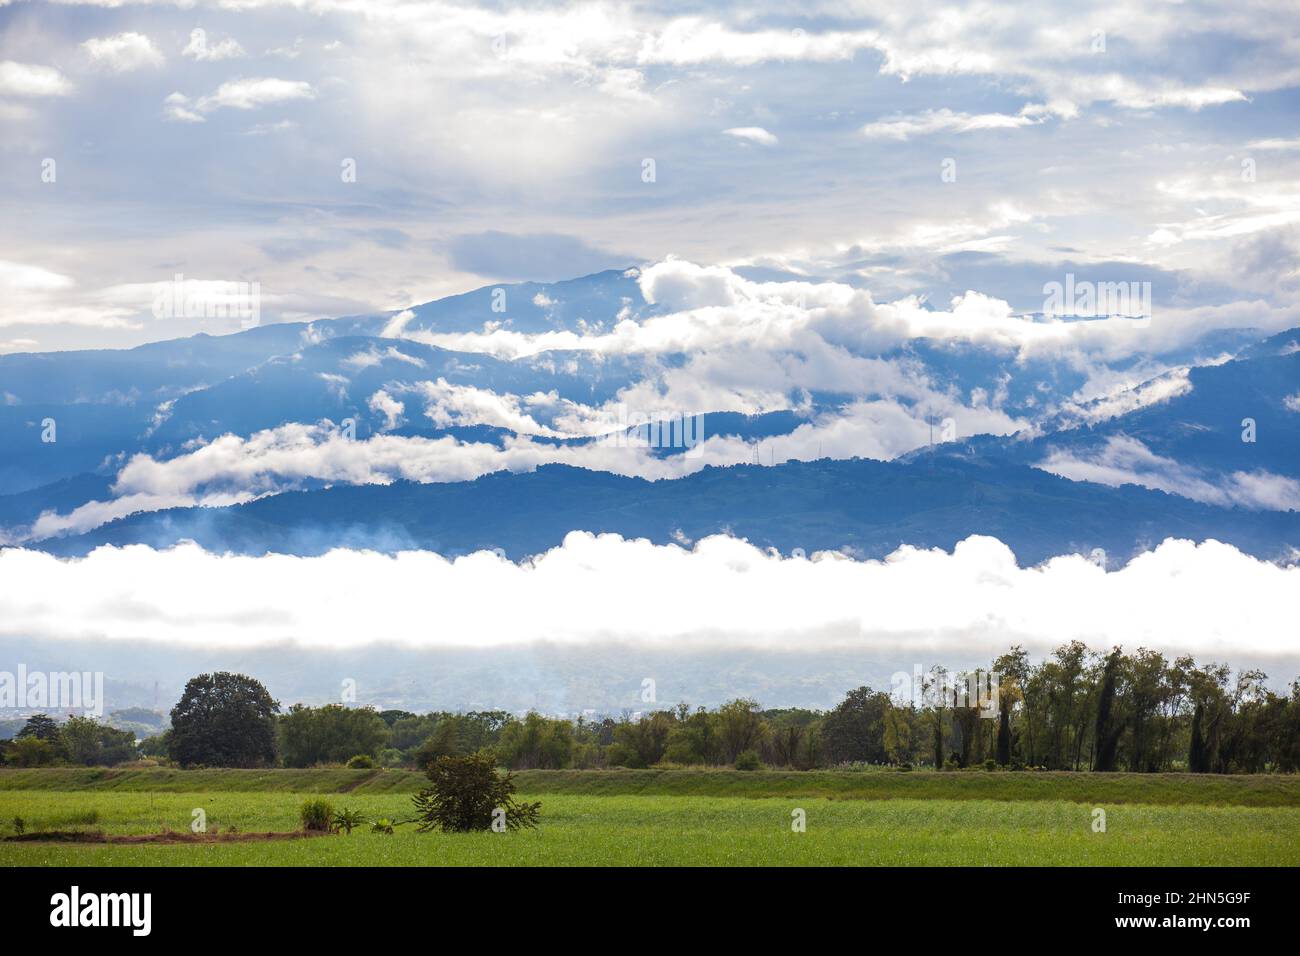 Sugar cane field and the majestic mountains at the Valle del Cauca region in Colombia Stock Photo